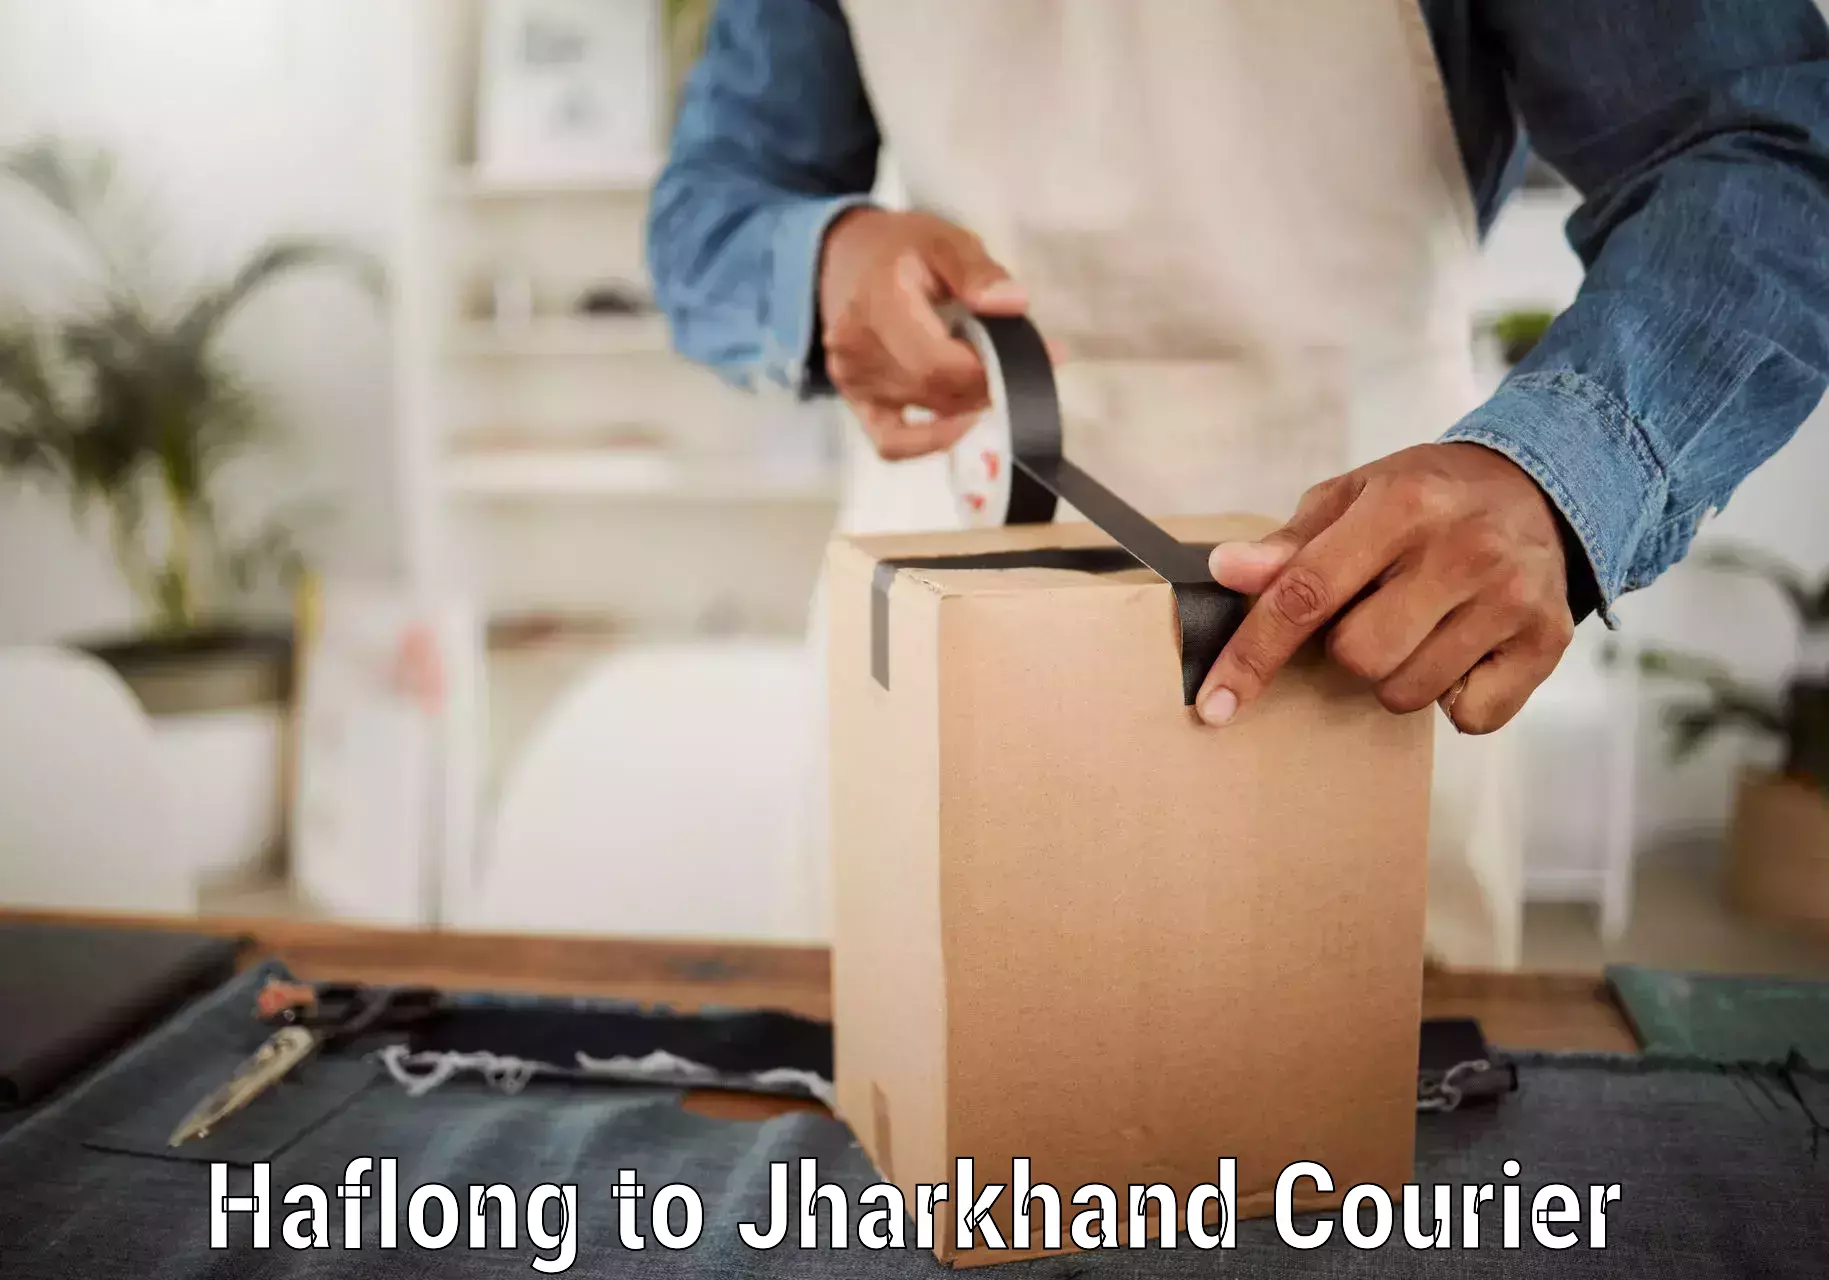 Local courier options Haflong to Jamshedpur